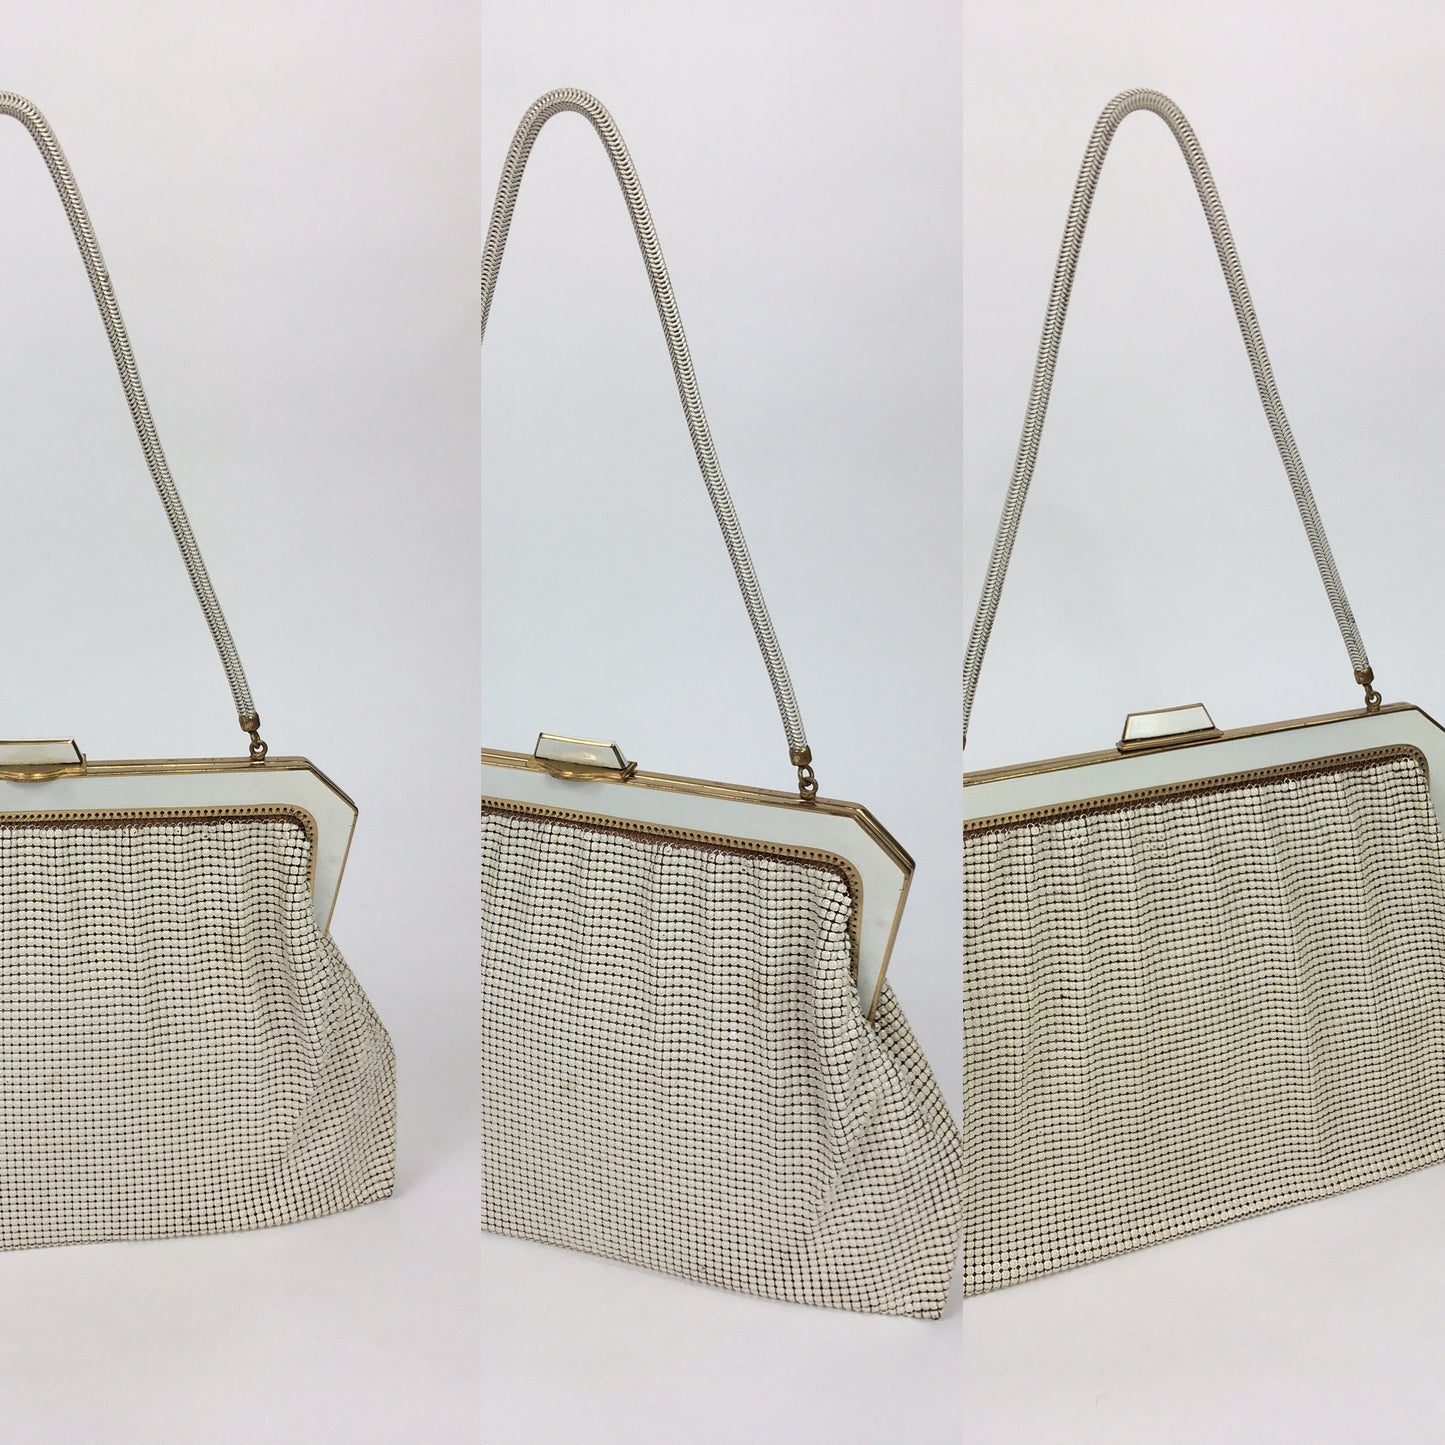 Original Late 1950s Early 1960’s Chain Bag - In a Fabulous Bright White with Lots of Movement